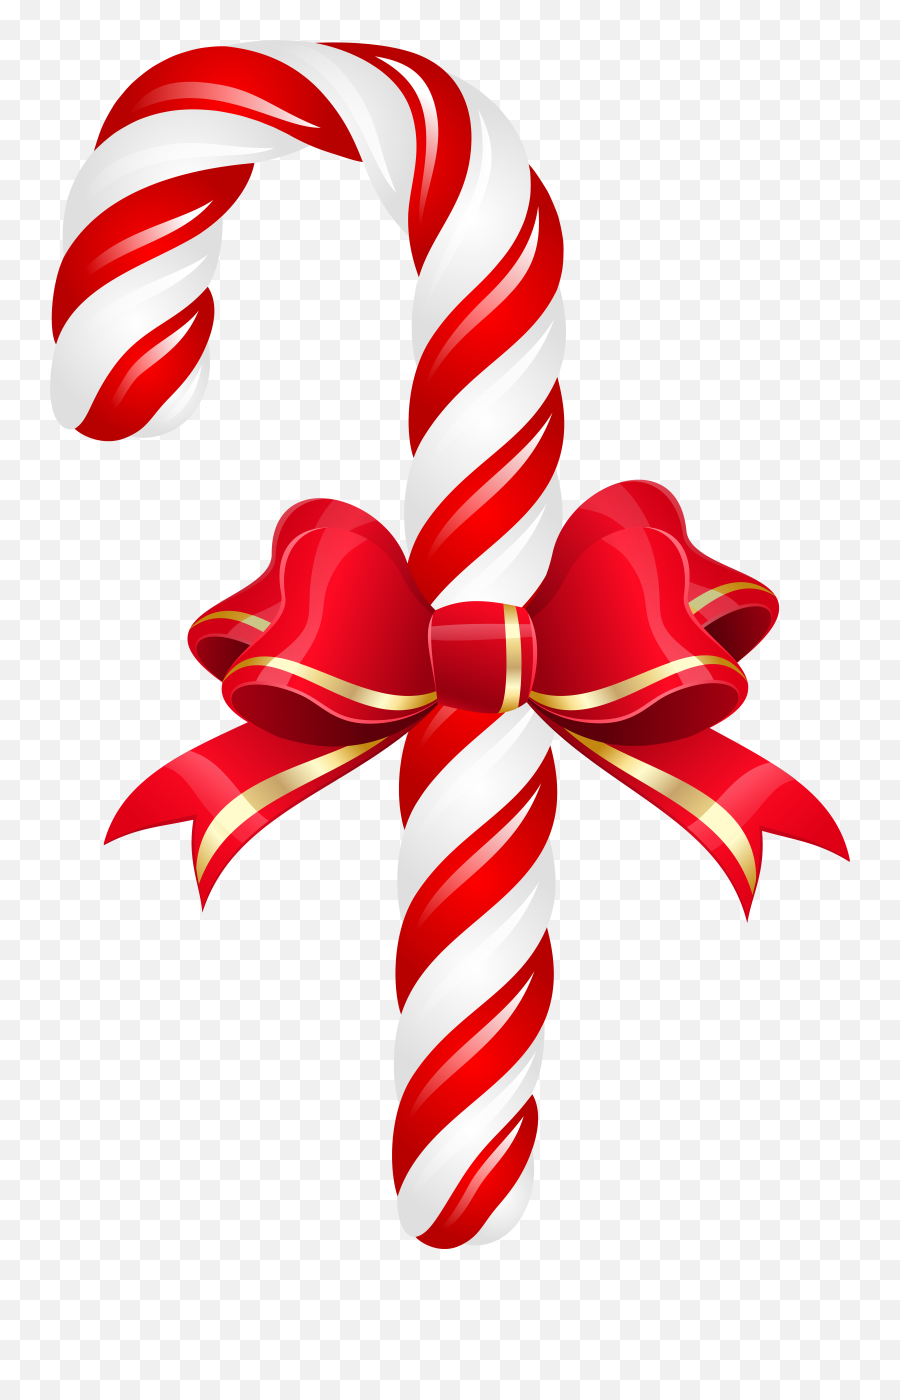 Free Clipart Of Candy Cane Png Transparent Background